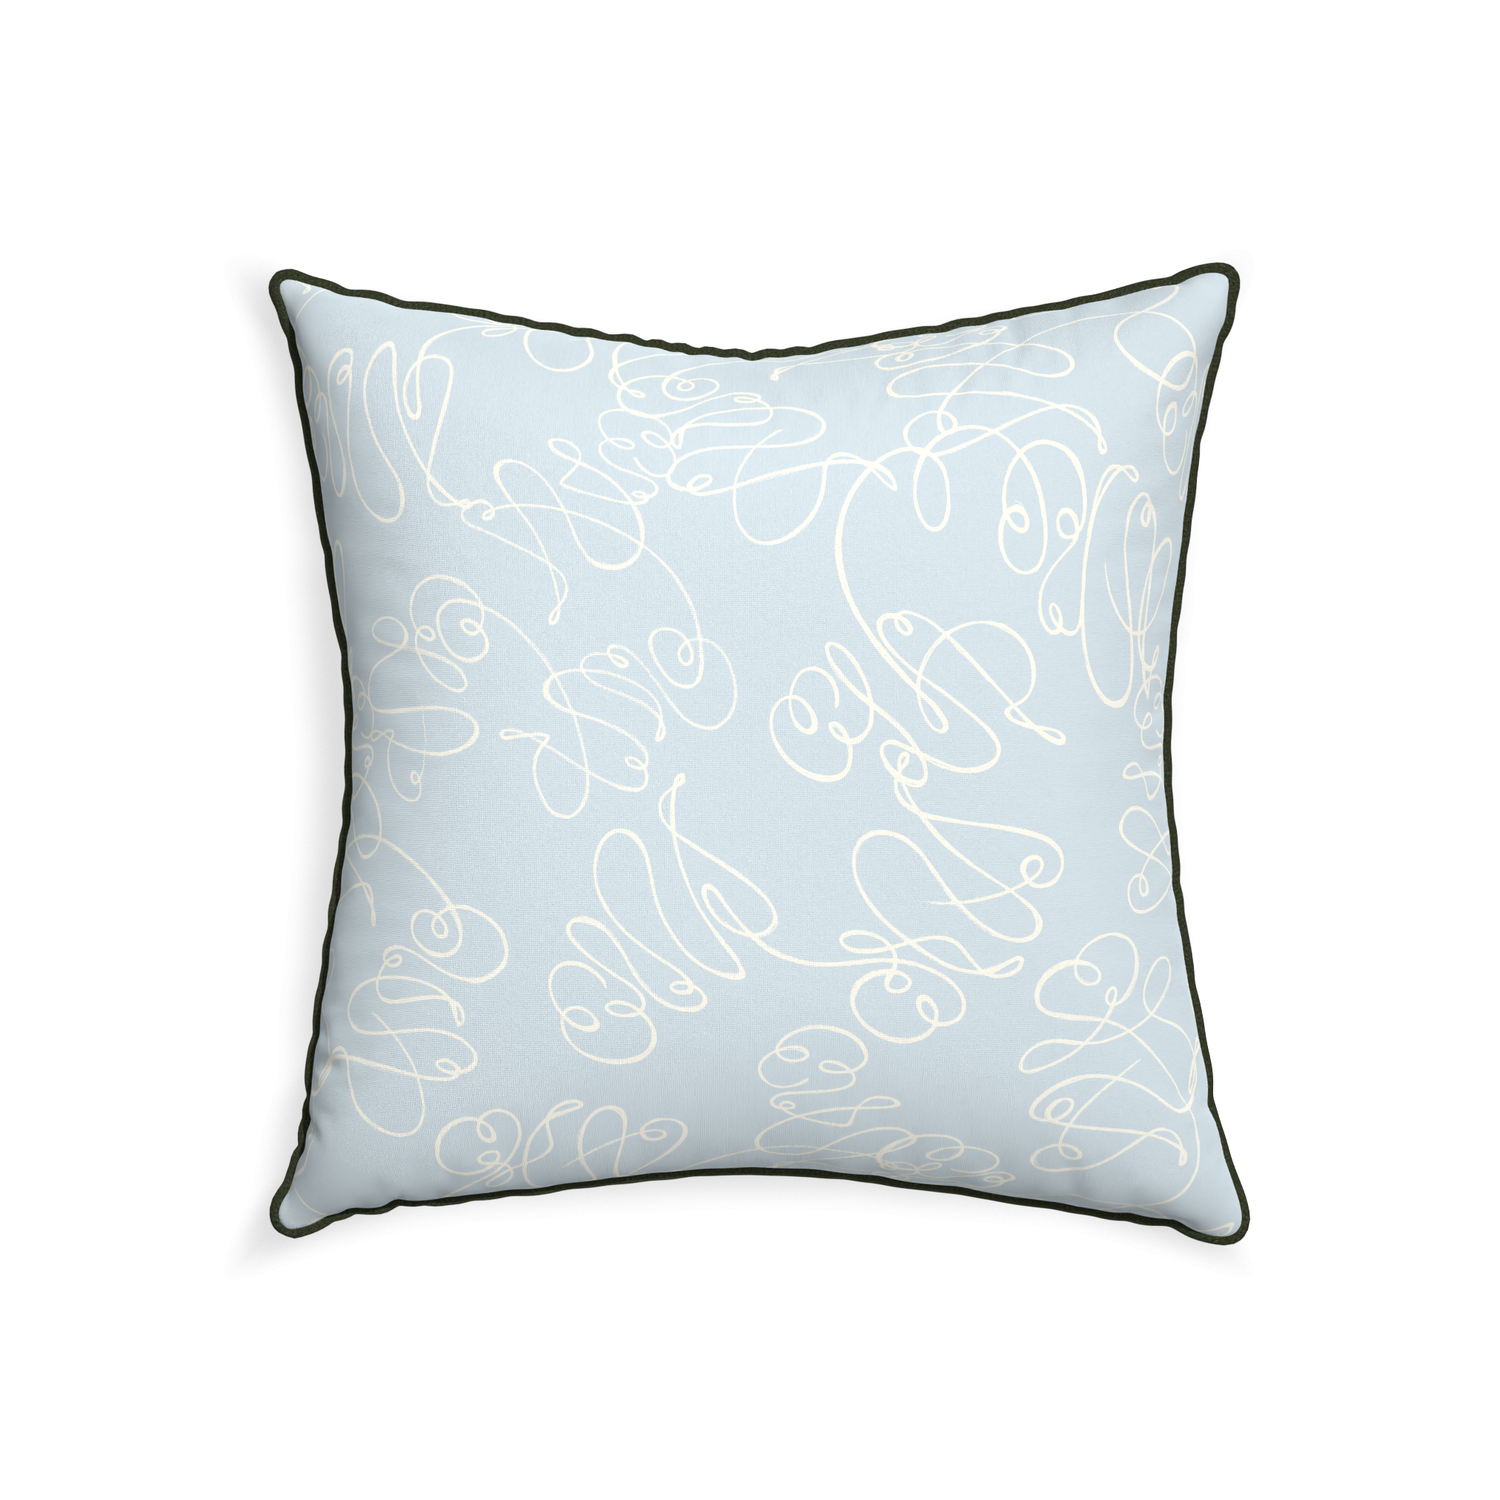 22-square mirabella custom powder blue abstractpillow with f piping on white background